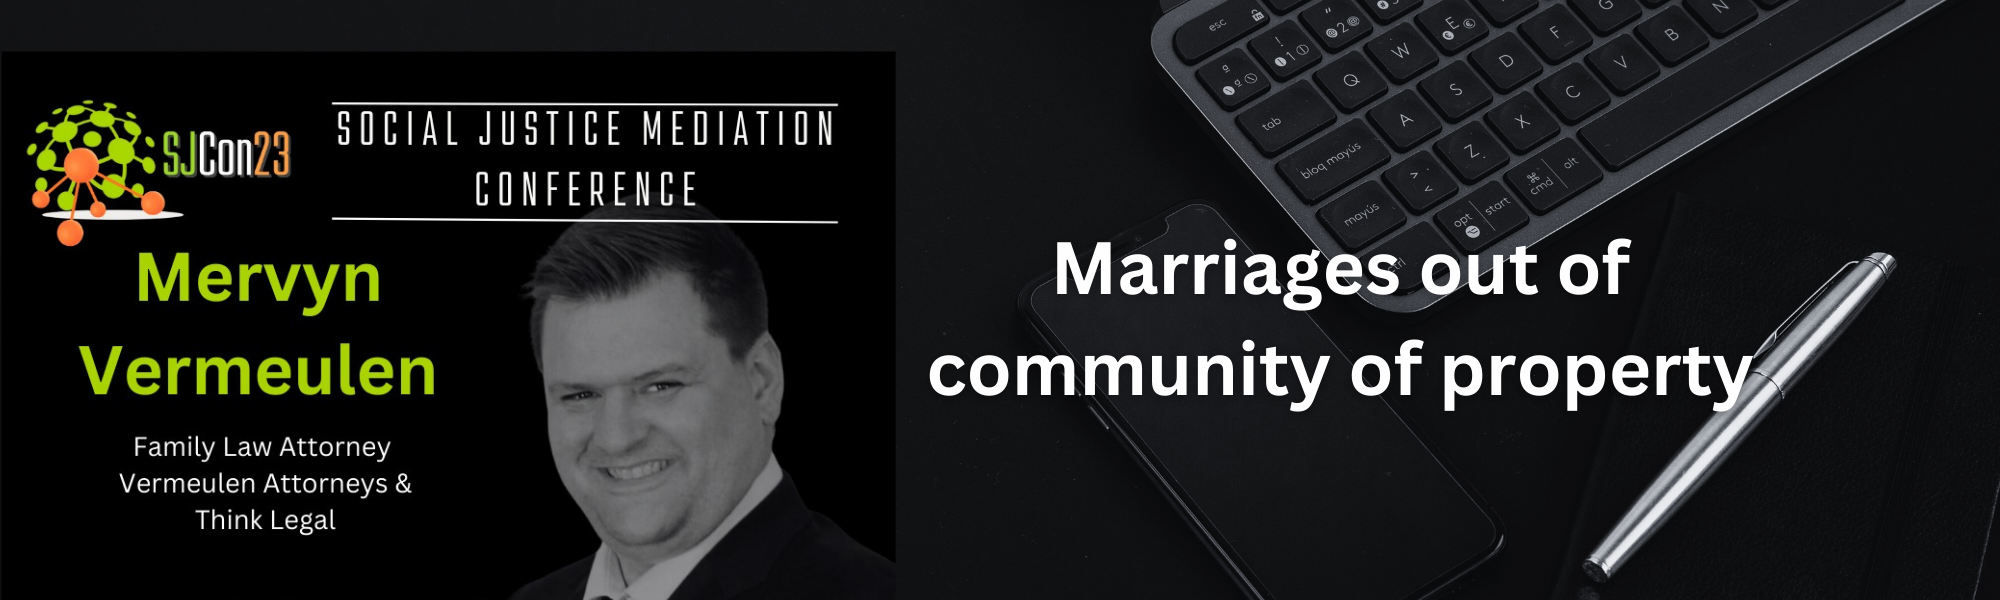 Mediation of marriages out of community of property